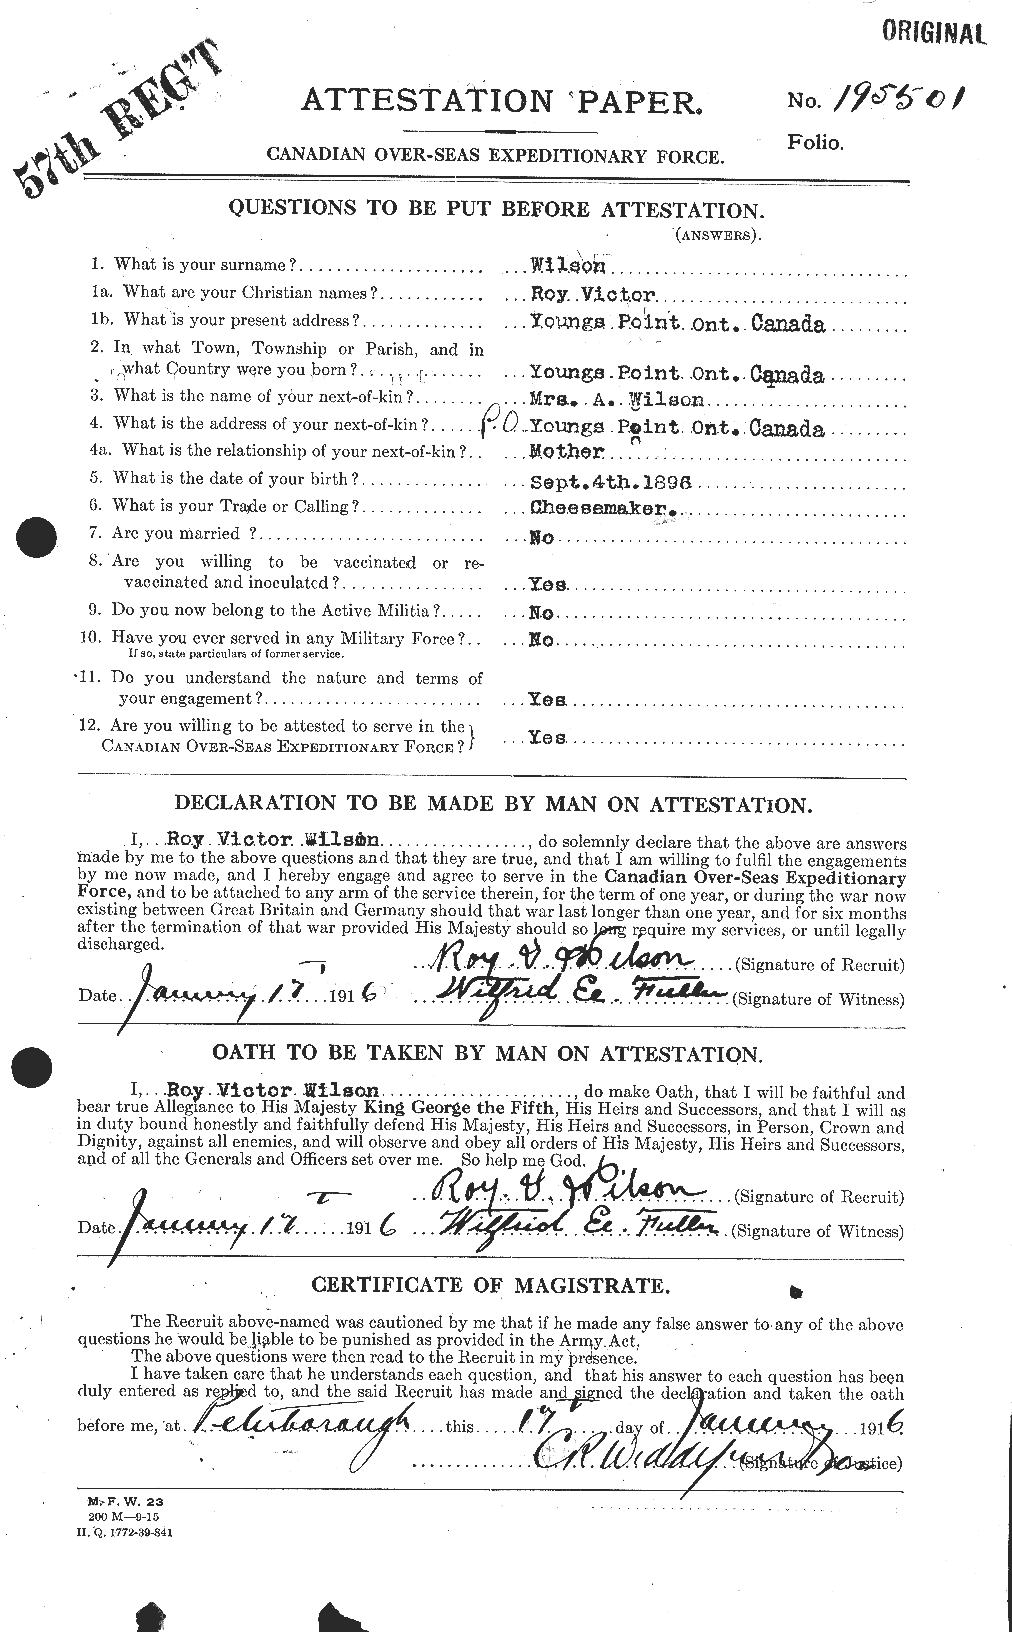 Personnel Records of the First World War - CEF 681068a